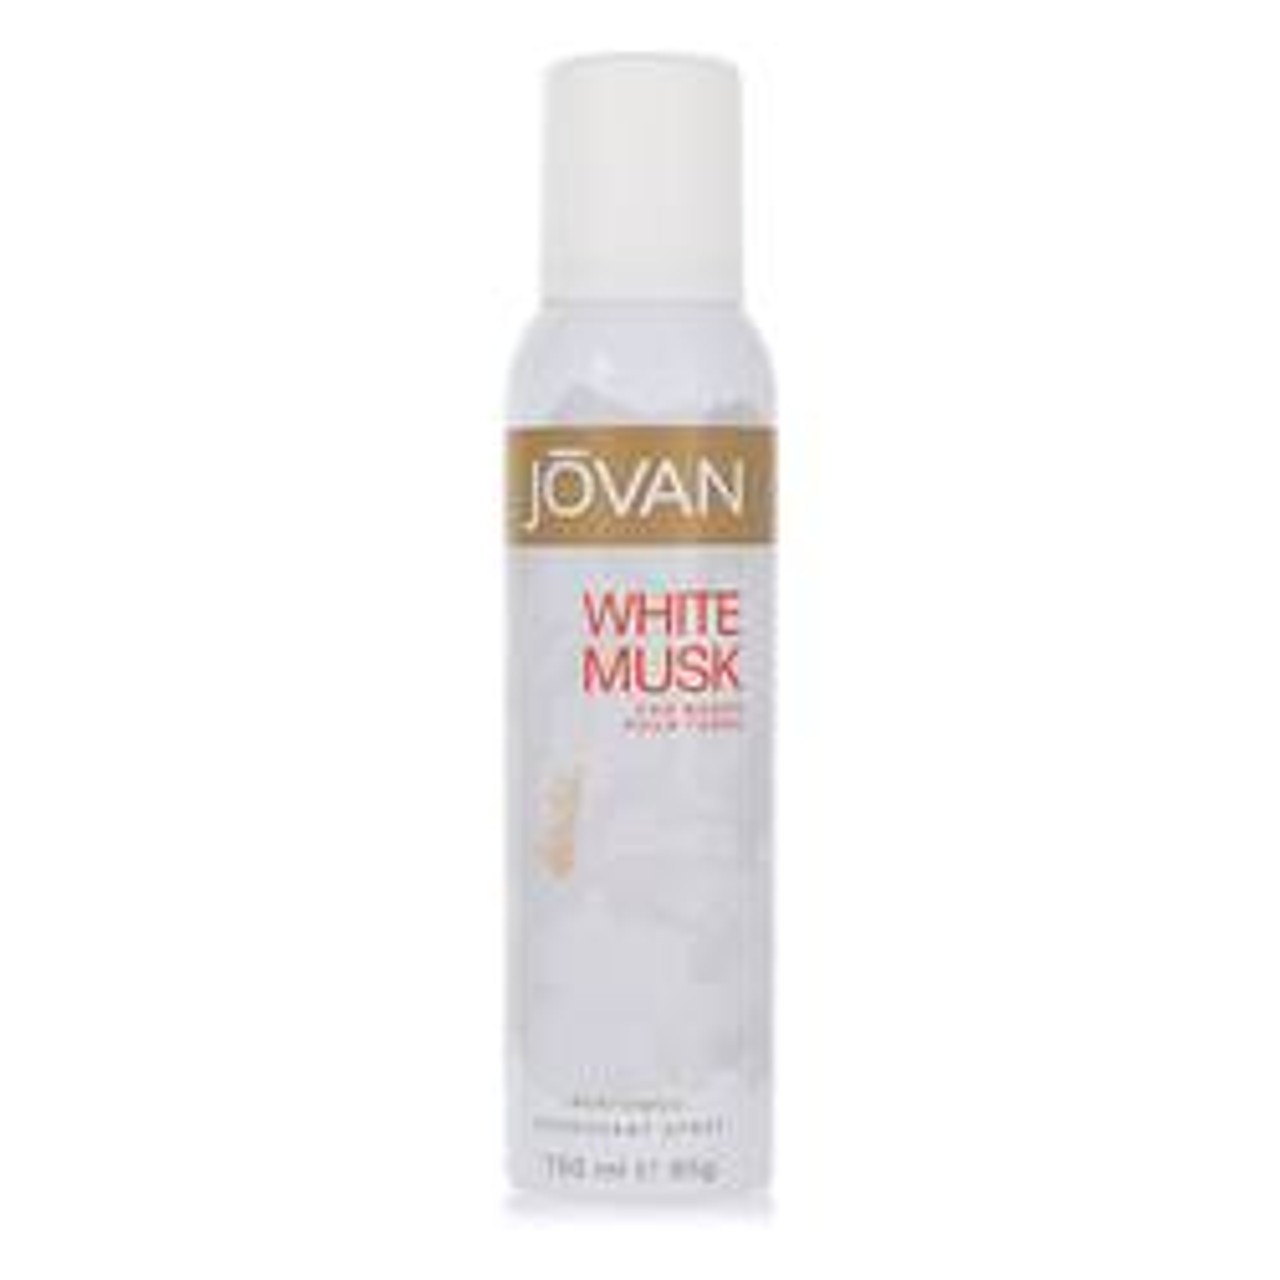 Jovan White Musk Perfume By Jovan Deodorant Spray 5 oz for Women - [From 19.00 - Choose pk Qty ] - *Ships from Miami